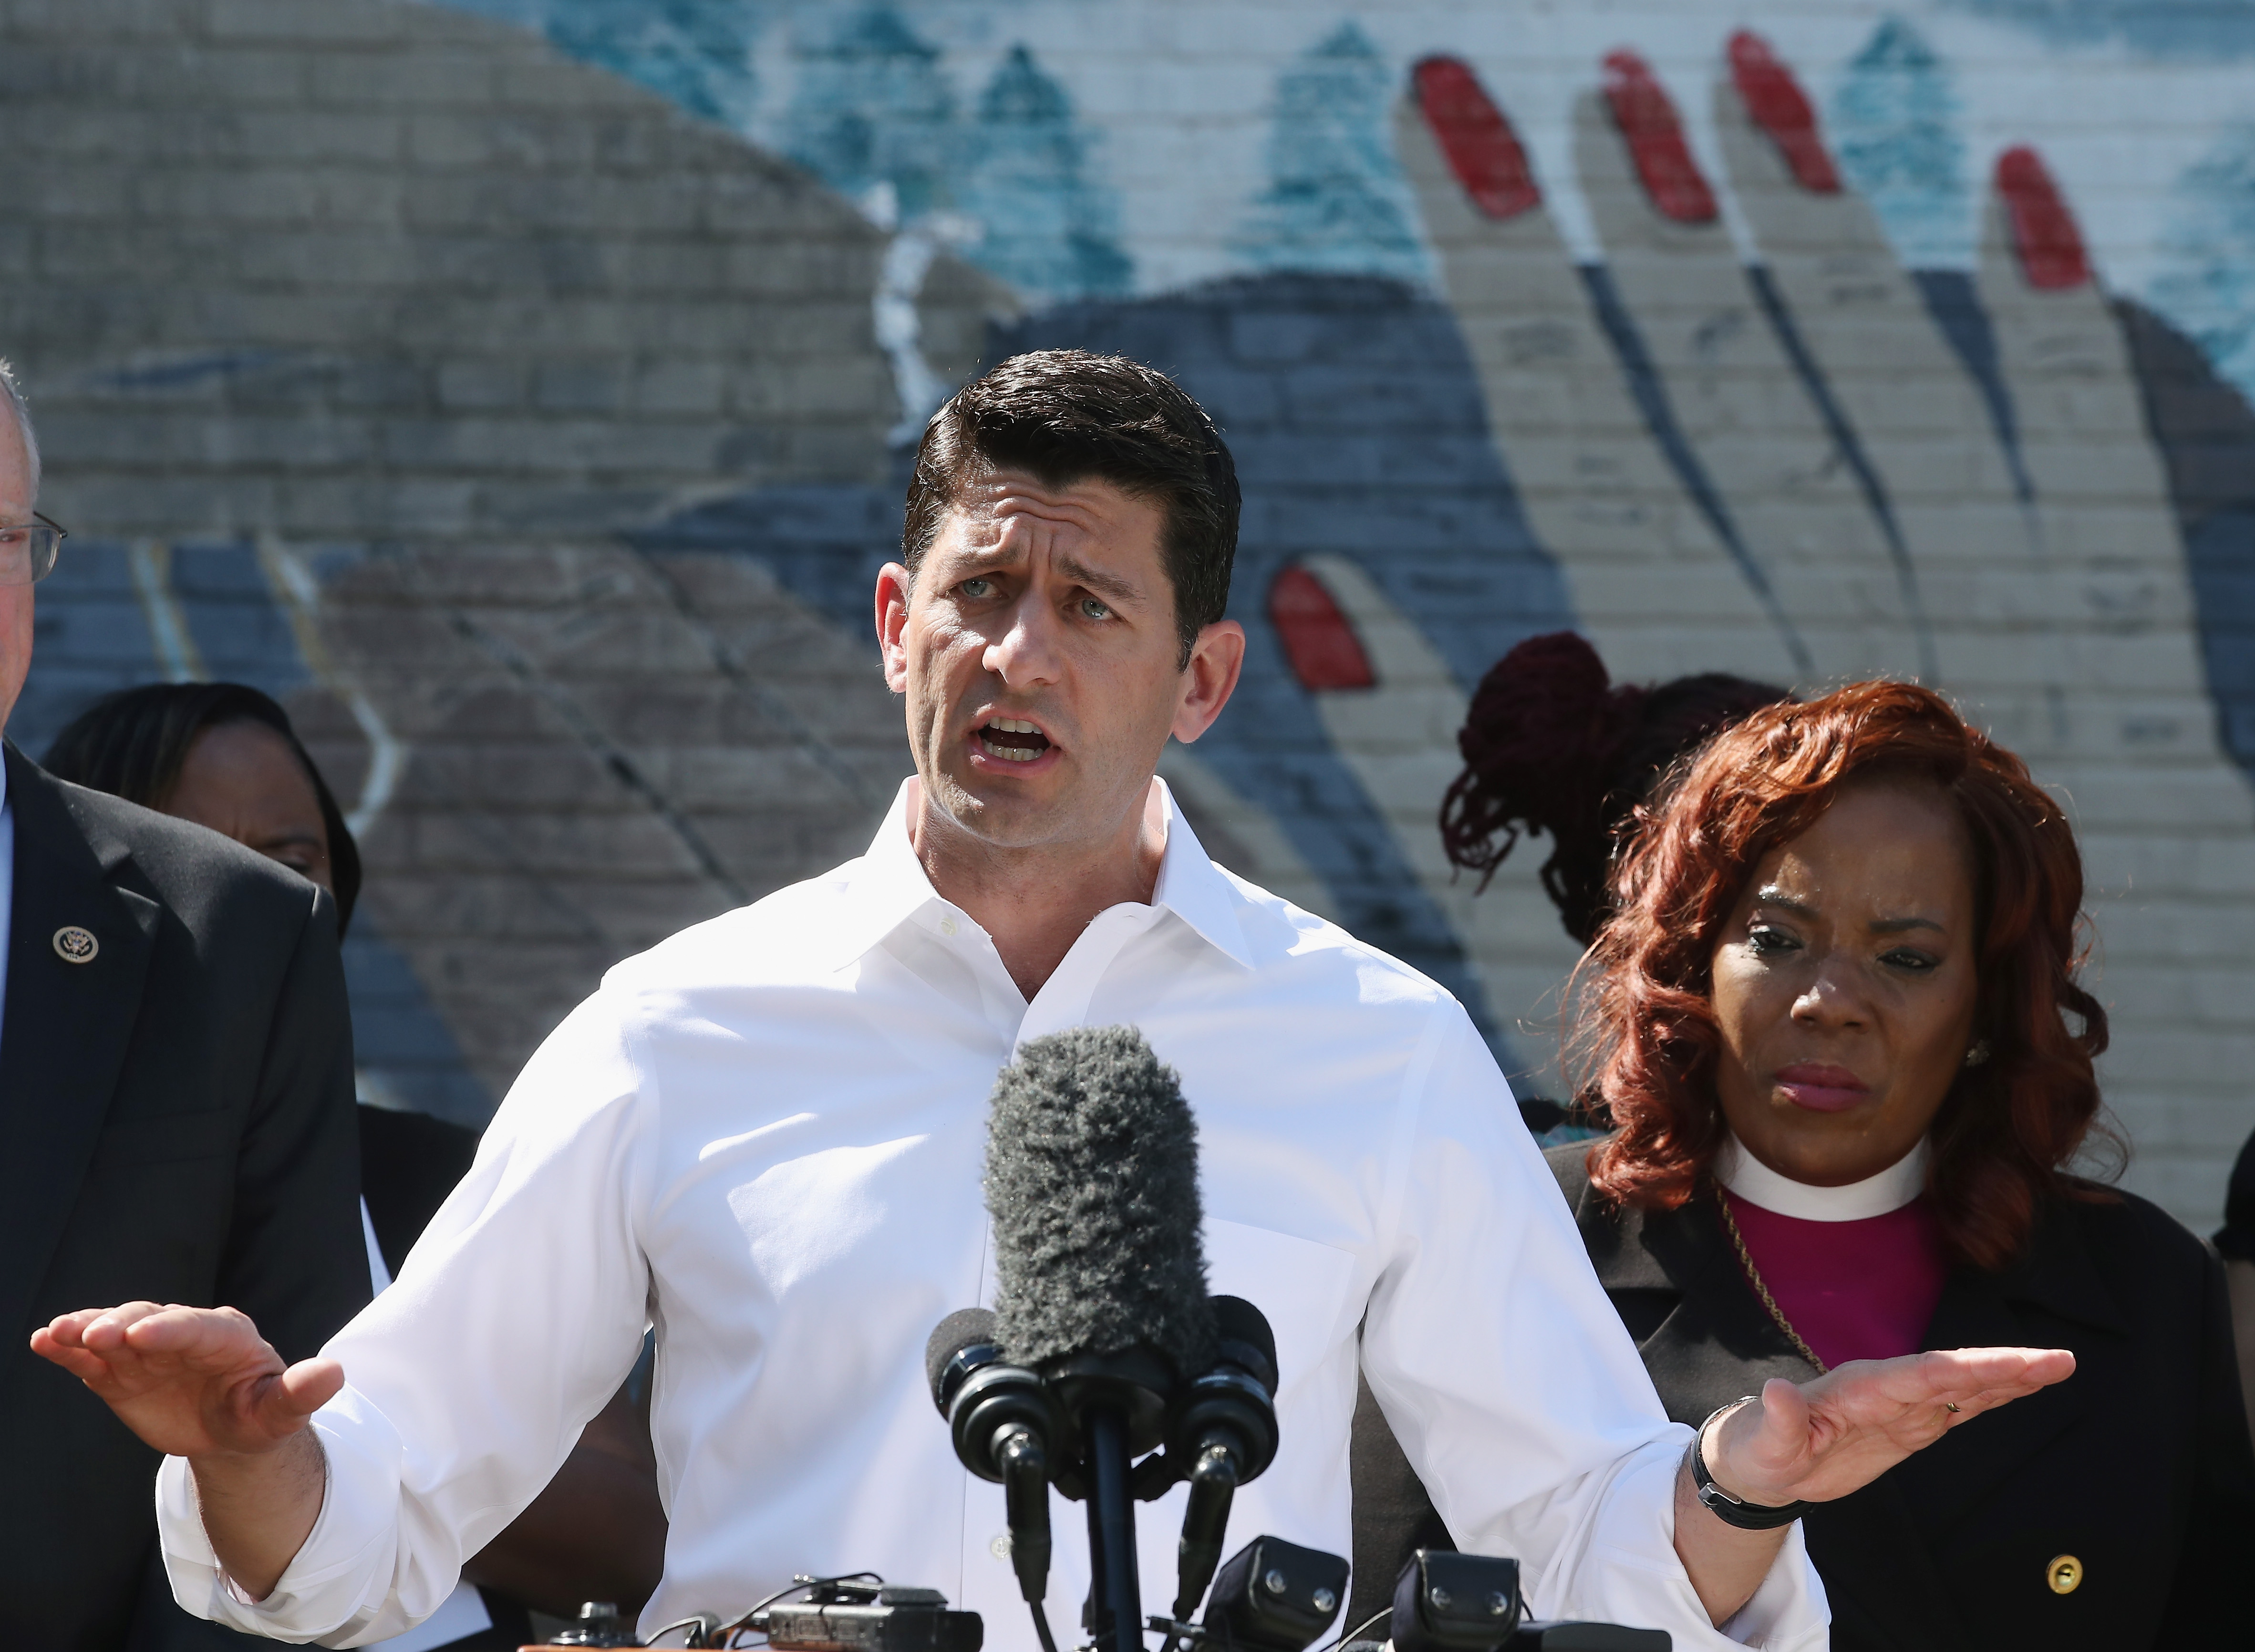 U.S. Speaker of the House Paul Ryan (R-WI), speaks while flanked by Bishop Shirley Holloway at the Graceview Apartments, June 7, 2016 in Washington, DC. (Mark Wilson/Getty Images)